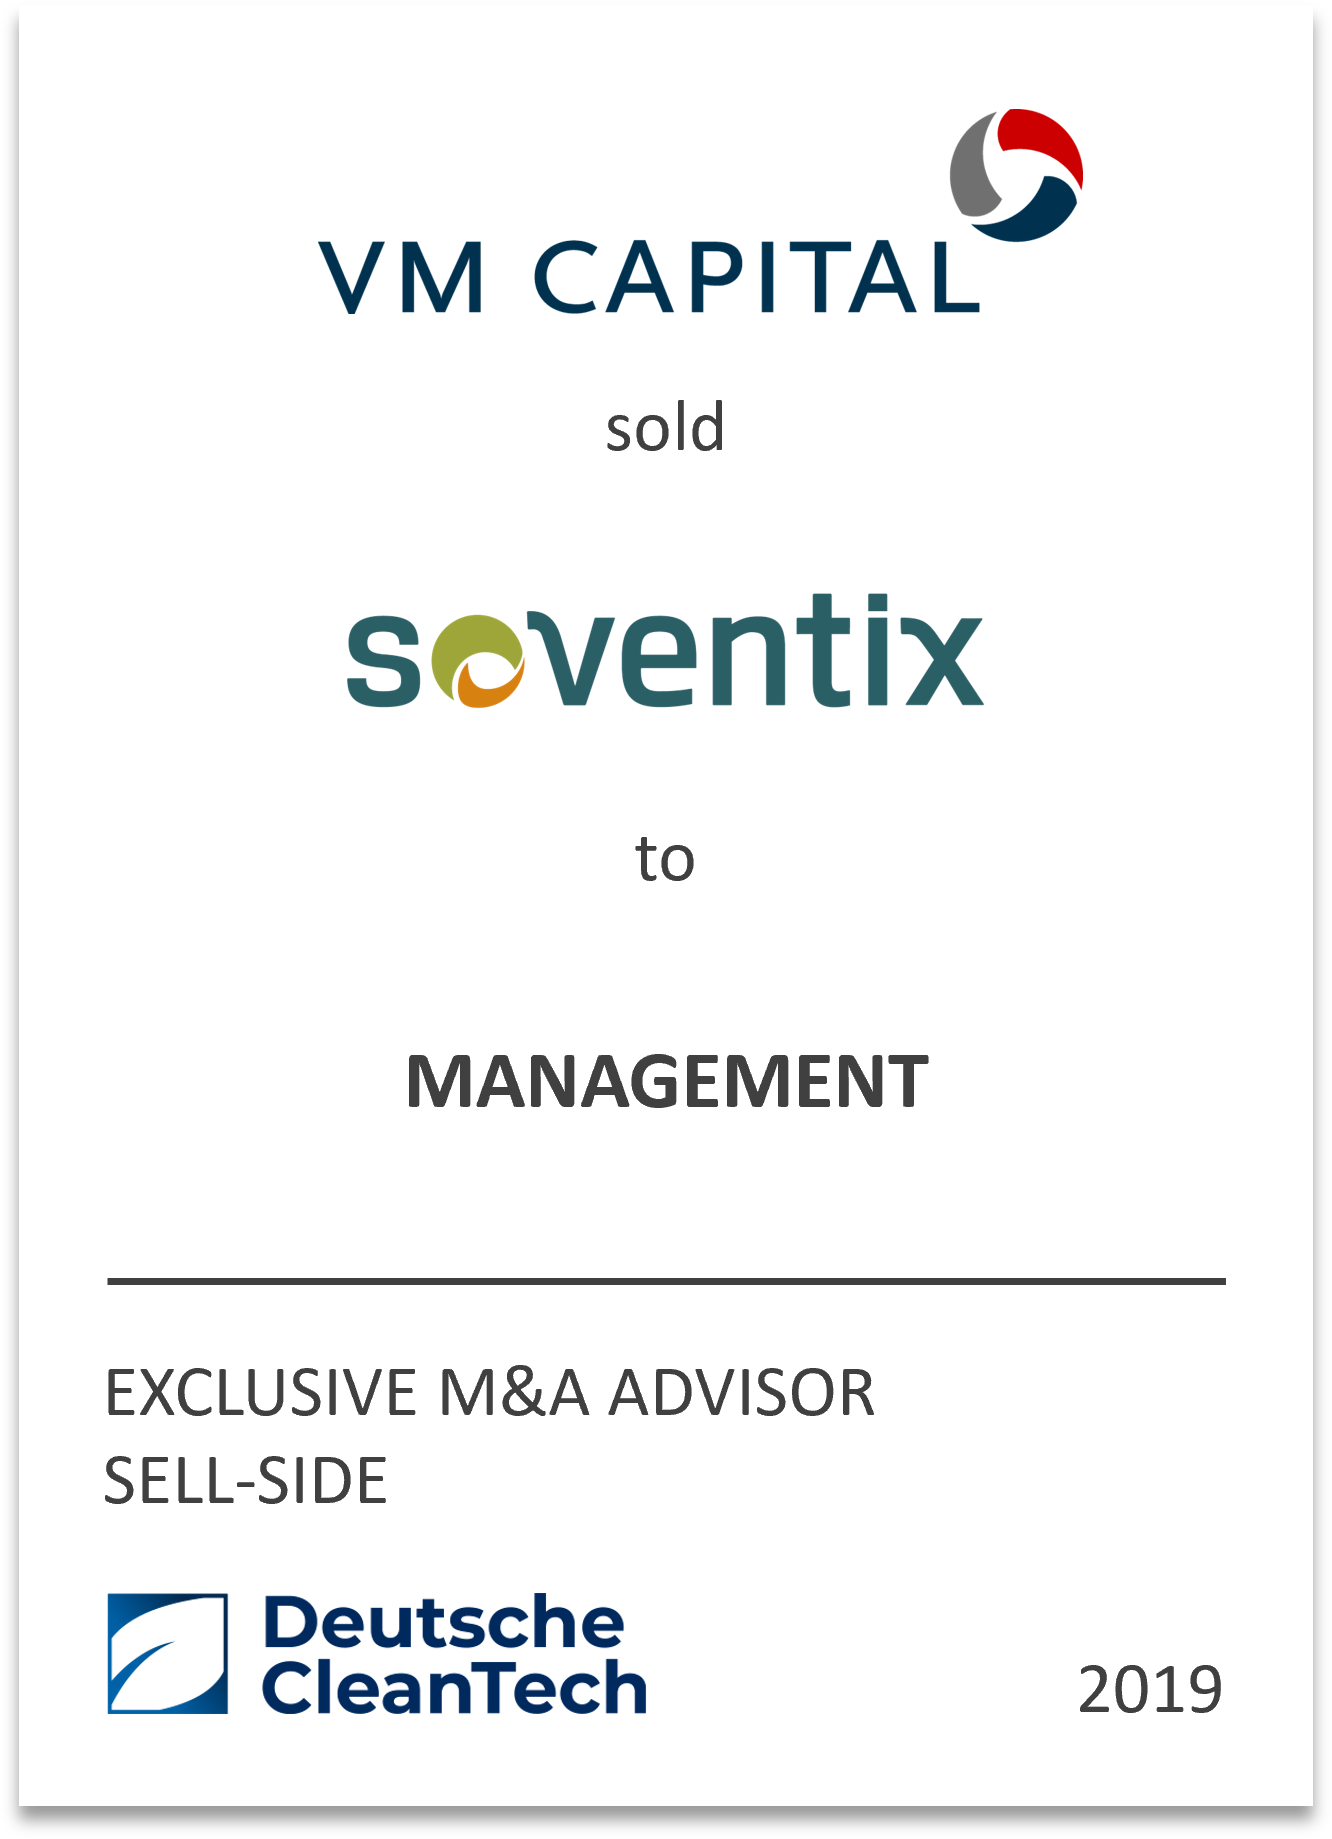 Soventix GmbH, the Germany-based developer and owner of PV plants, has been acquired in a management buyout (MBO) from VM Capital Advisors GmbH, a Germany-based private equity firm